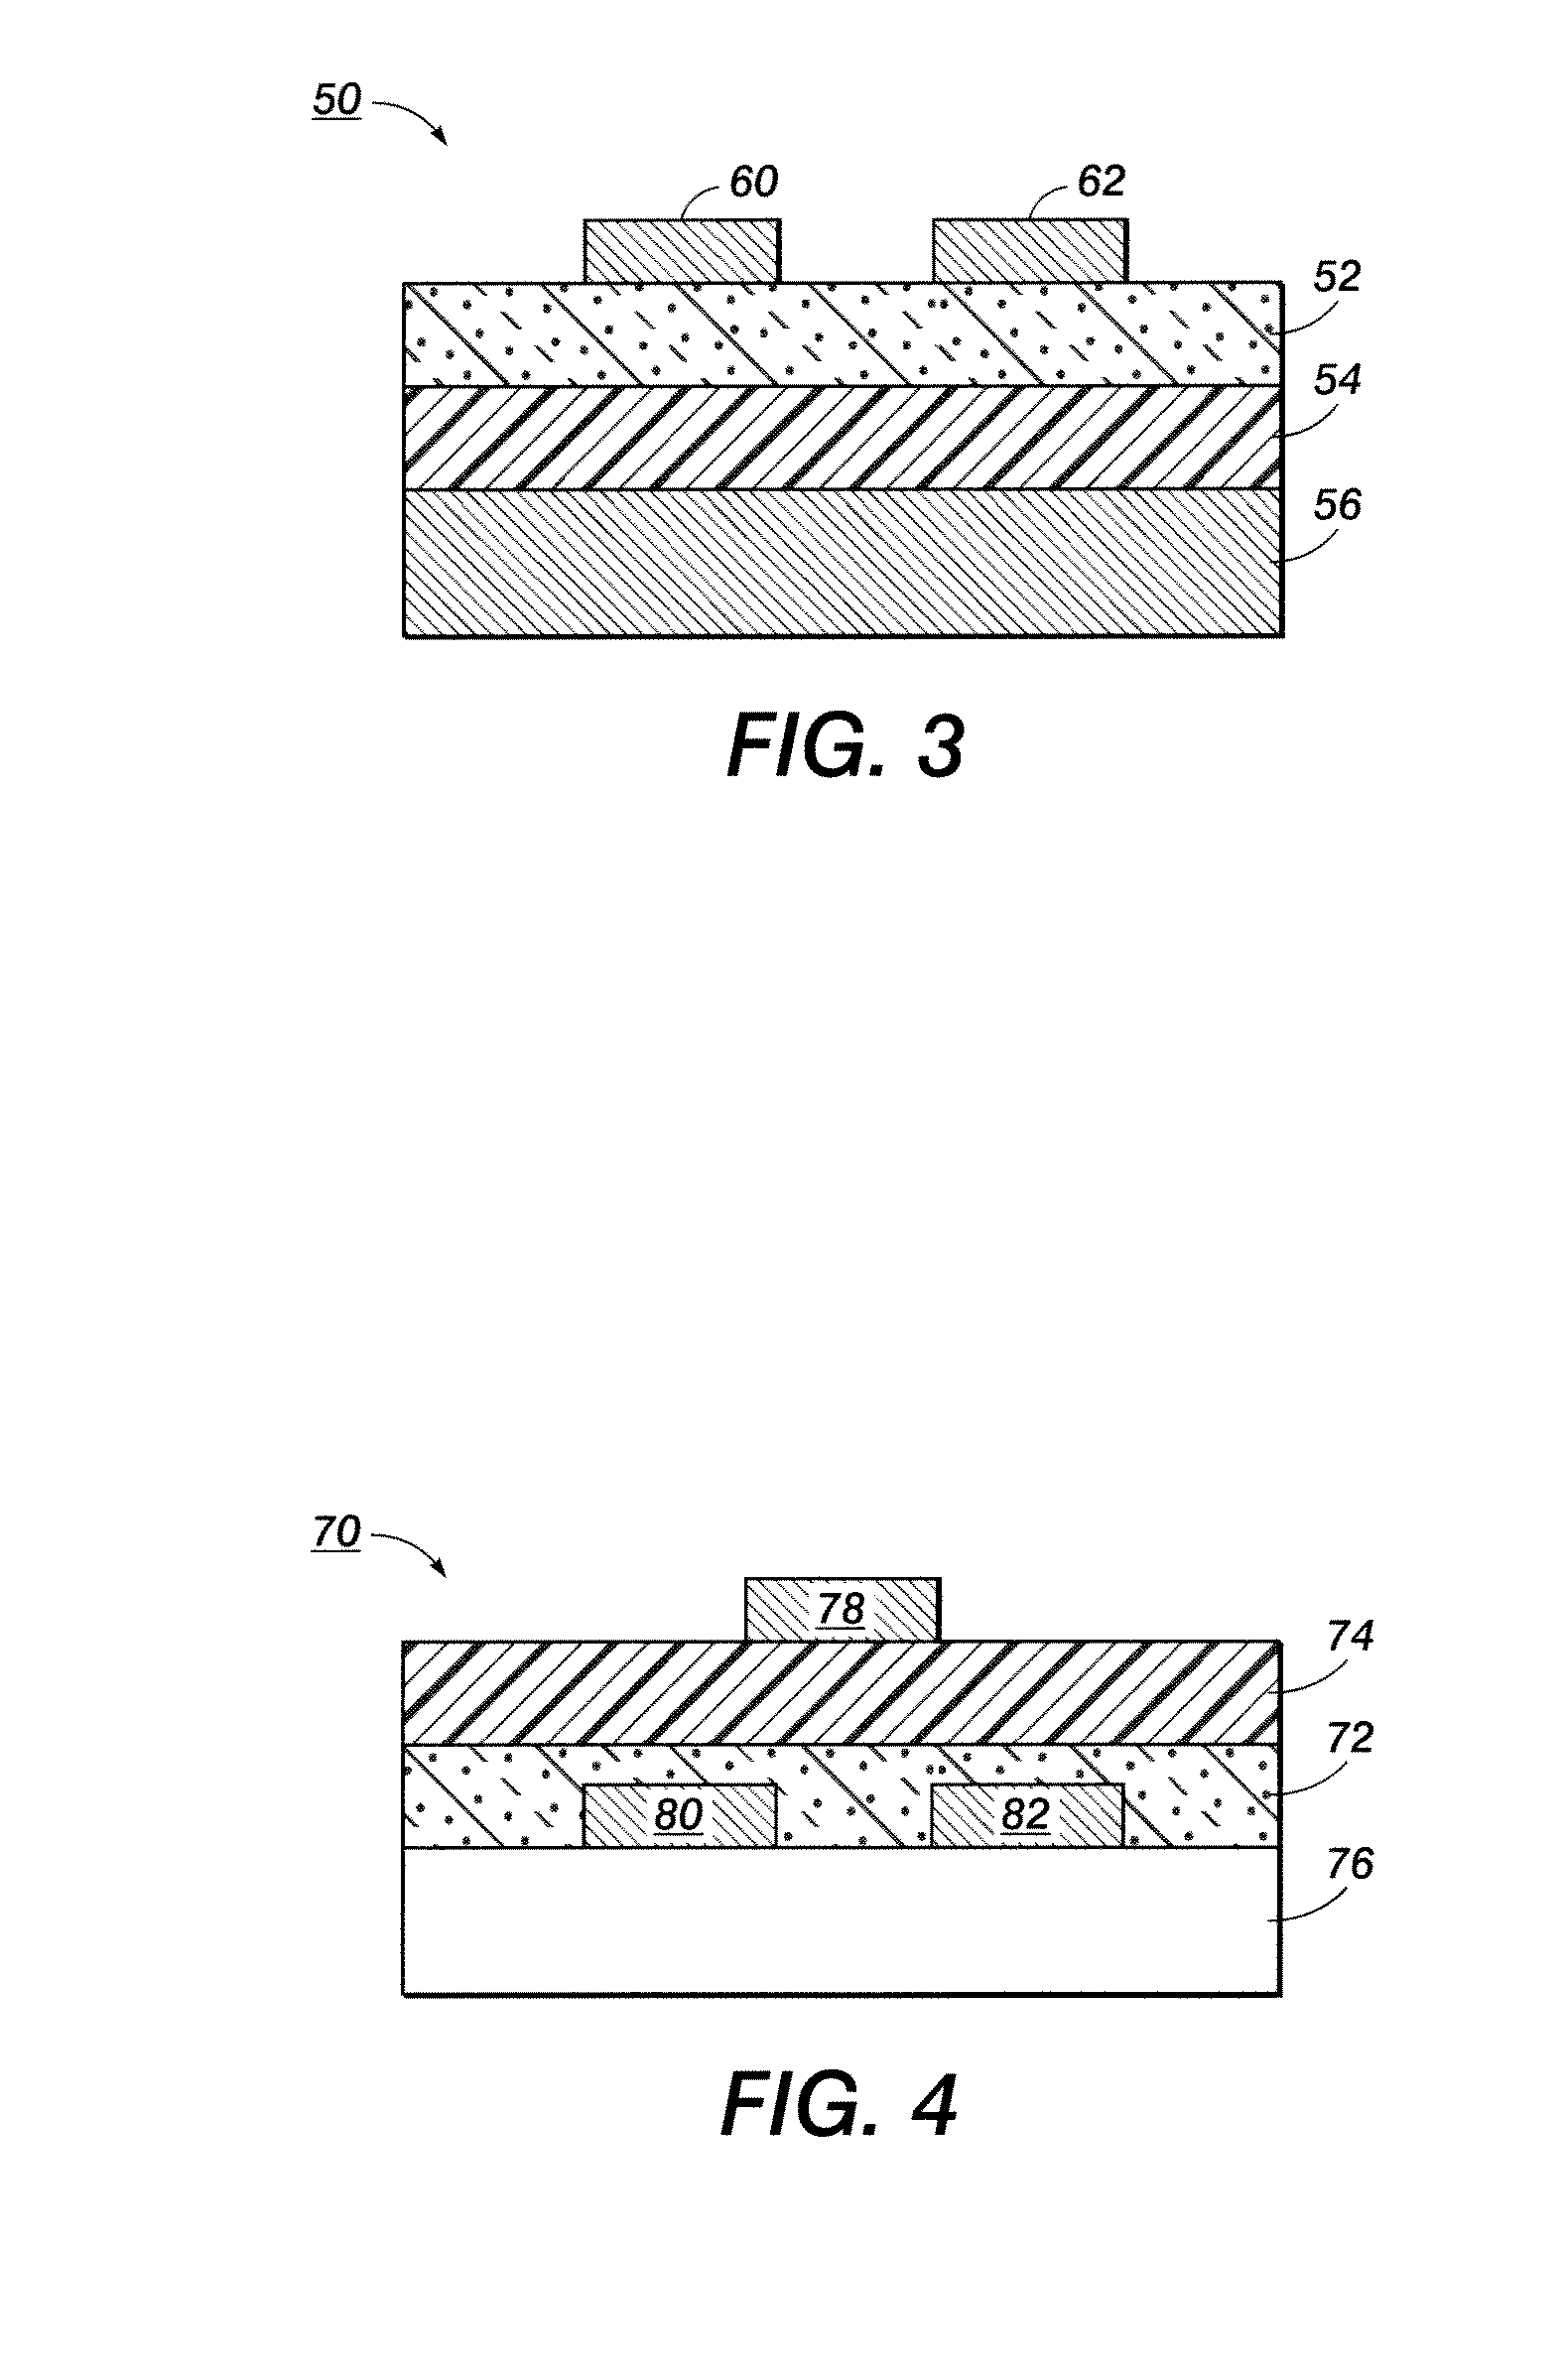 Carboxylic acid stabilized silver nanoparticles and process for producing same